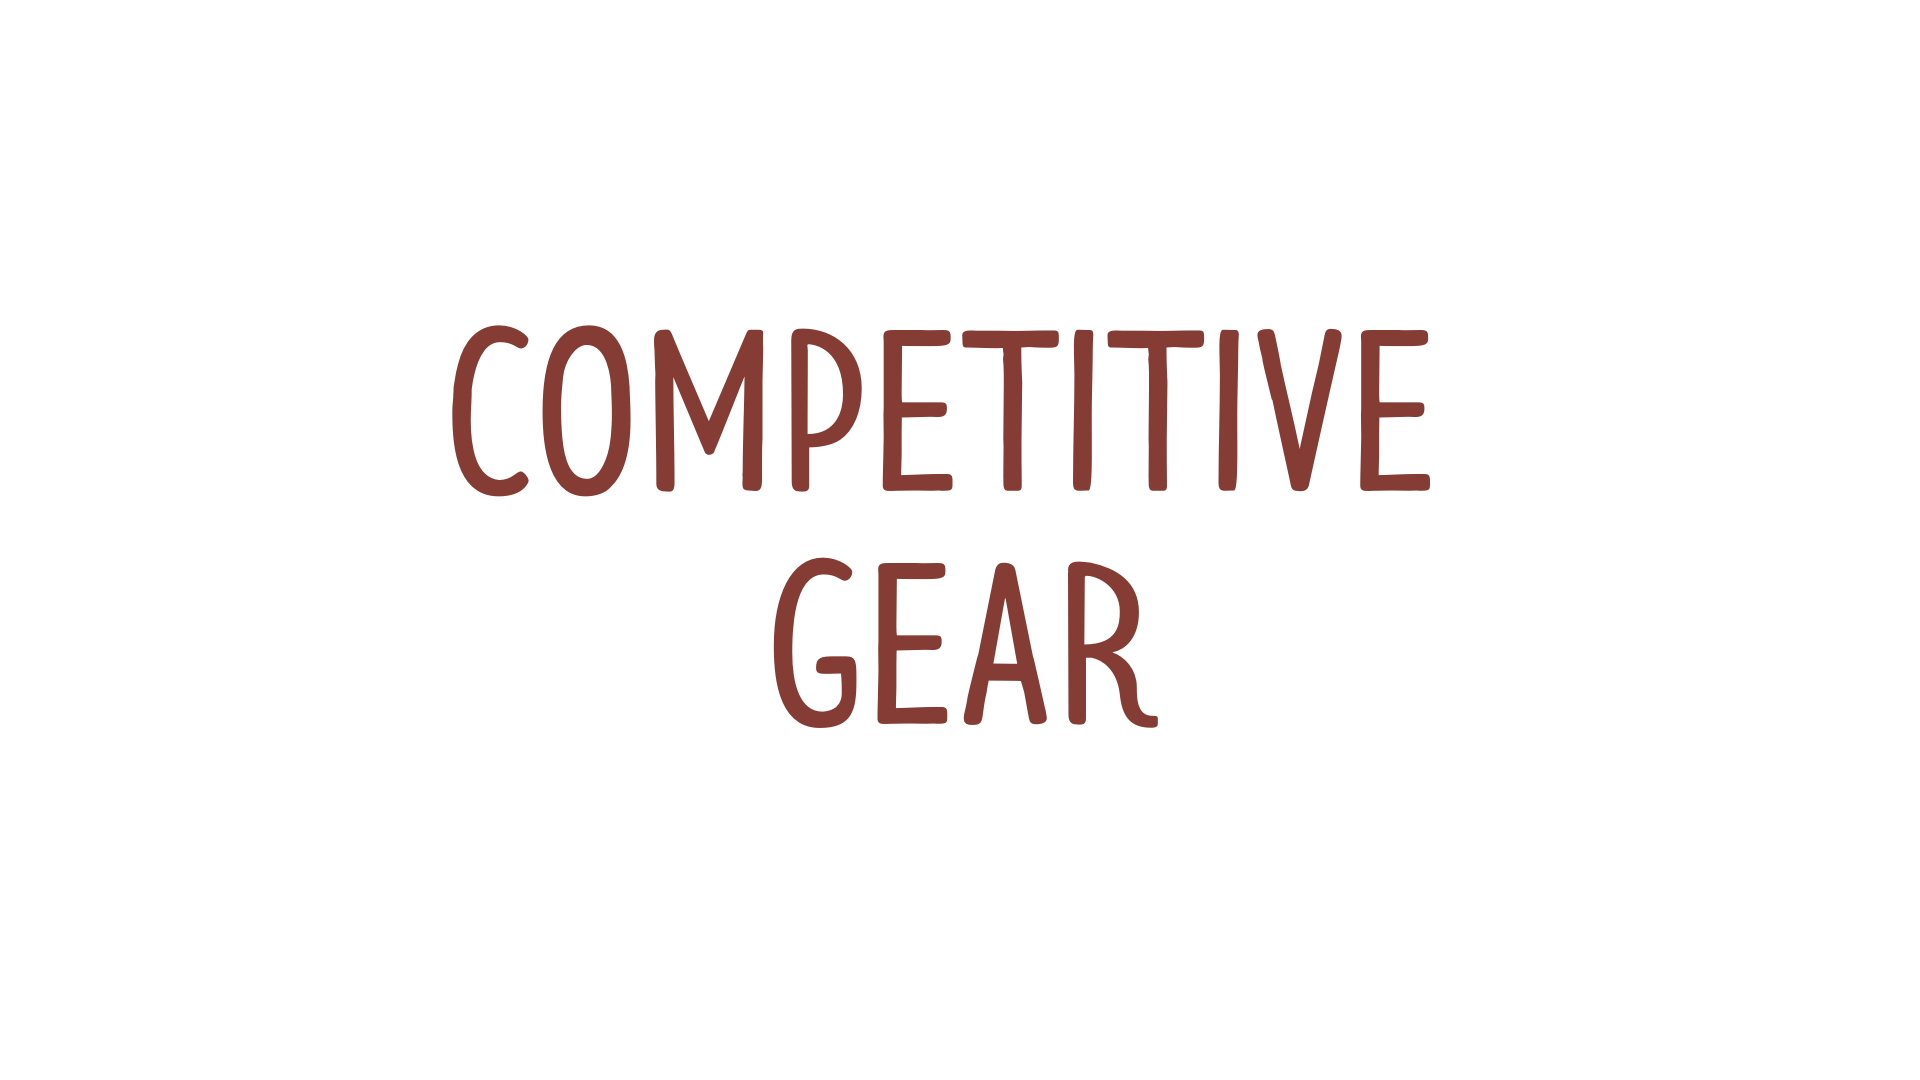 Competitive Gear WEB